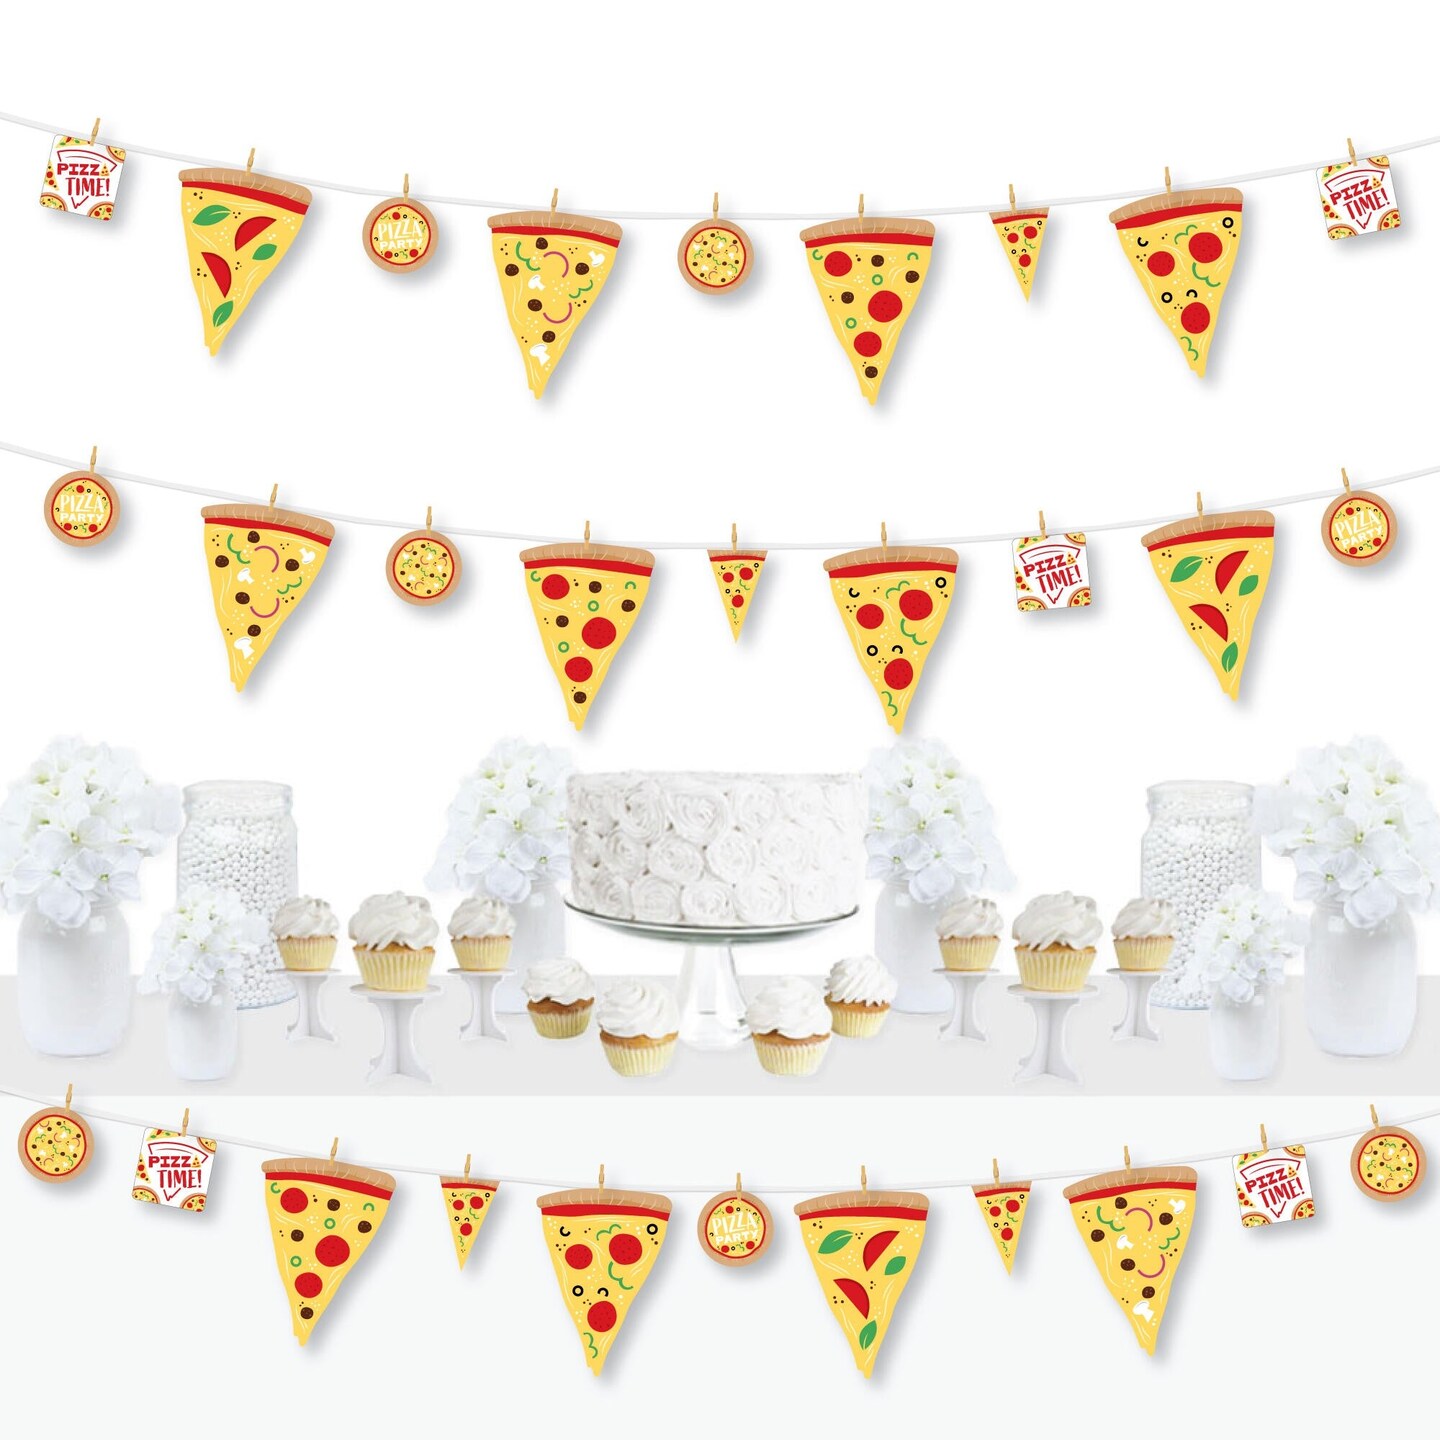 Big Dot of Happiness Pizza Party Time - Baby Shower or Birthday Party DIY Decorations - Clothespin Garland Banner - 44 Pieces